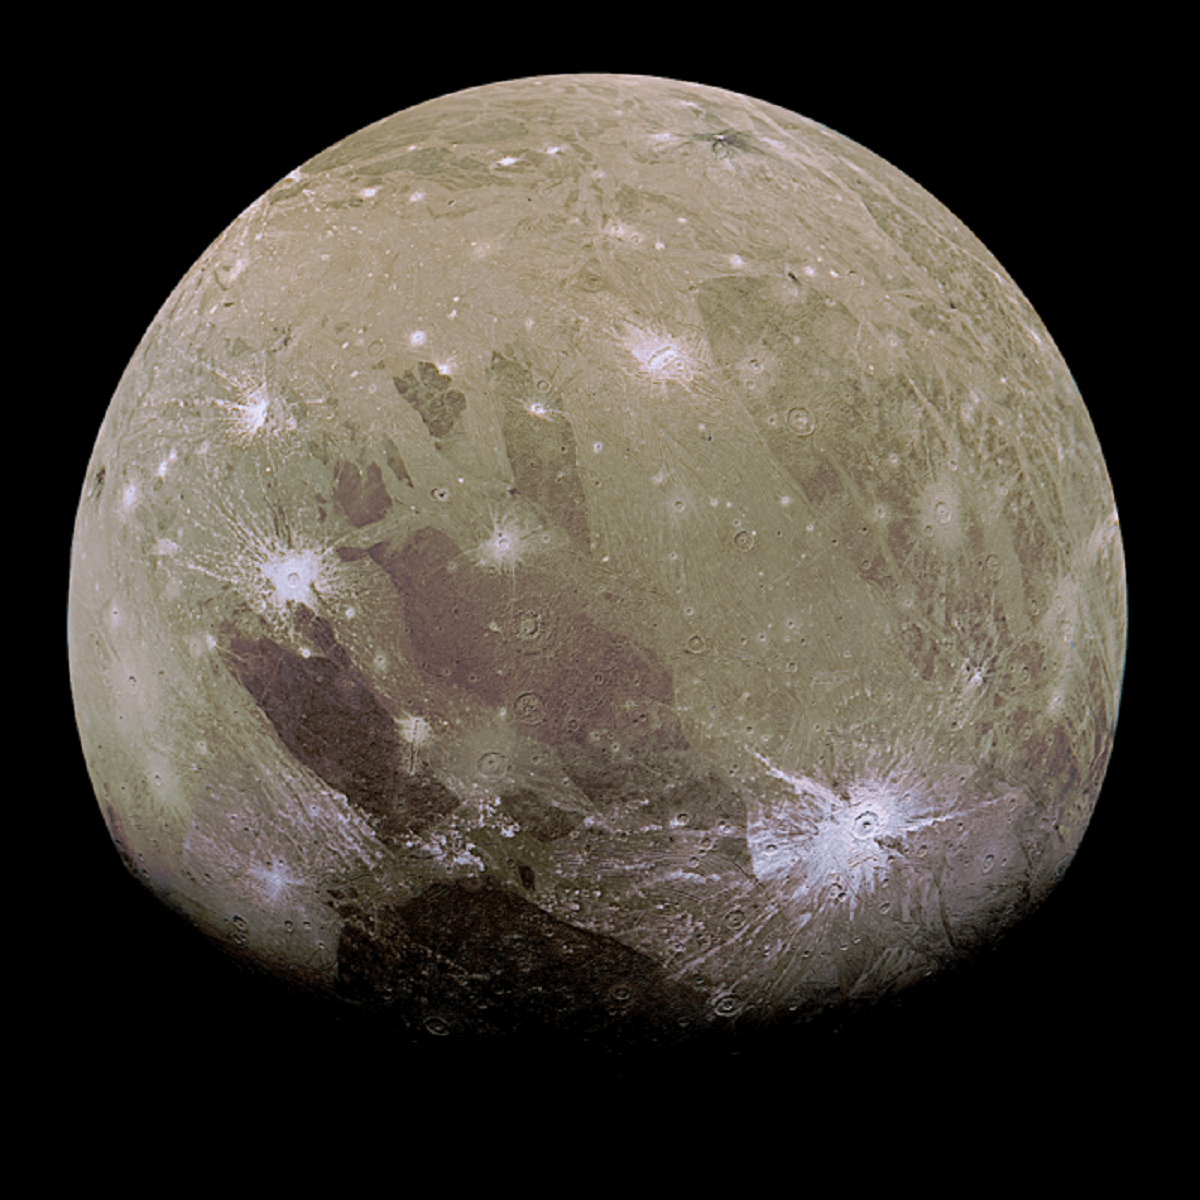 PIc of Ganymede, Jupiter's largest moon. It's beiged with splashes of white streaks across the surface.